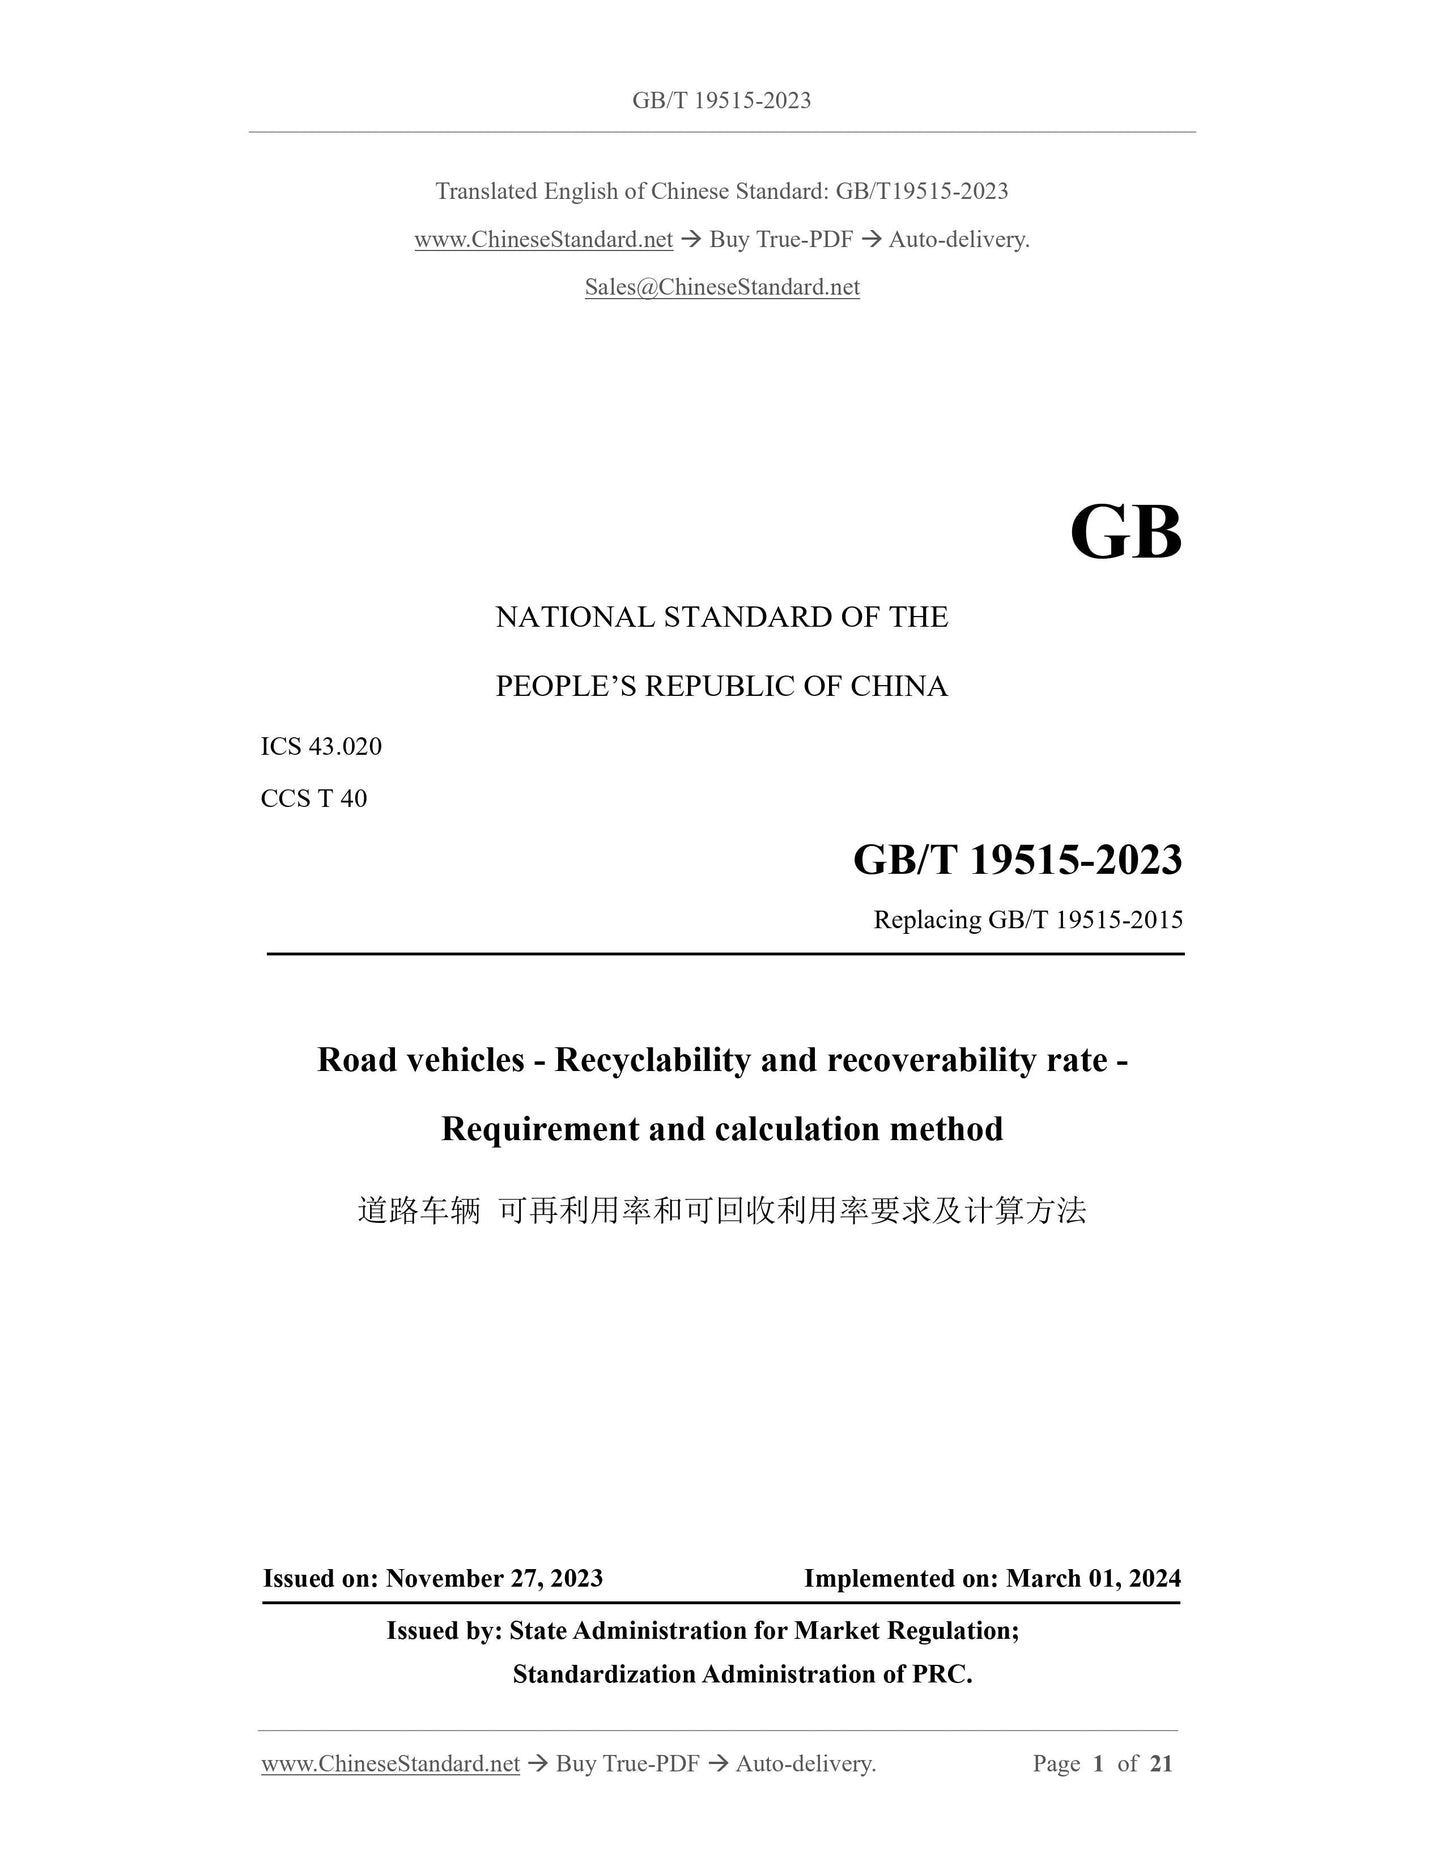 GB/T 19515-2023 Page 1